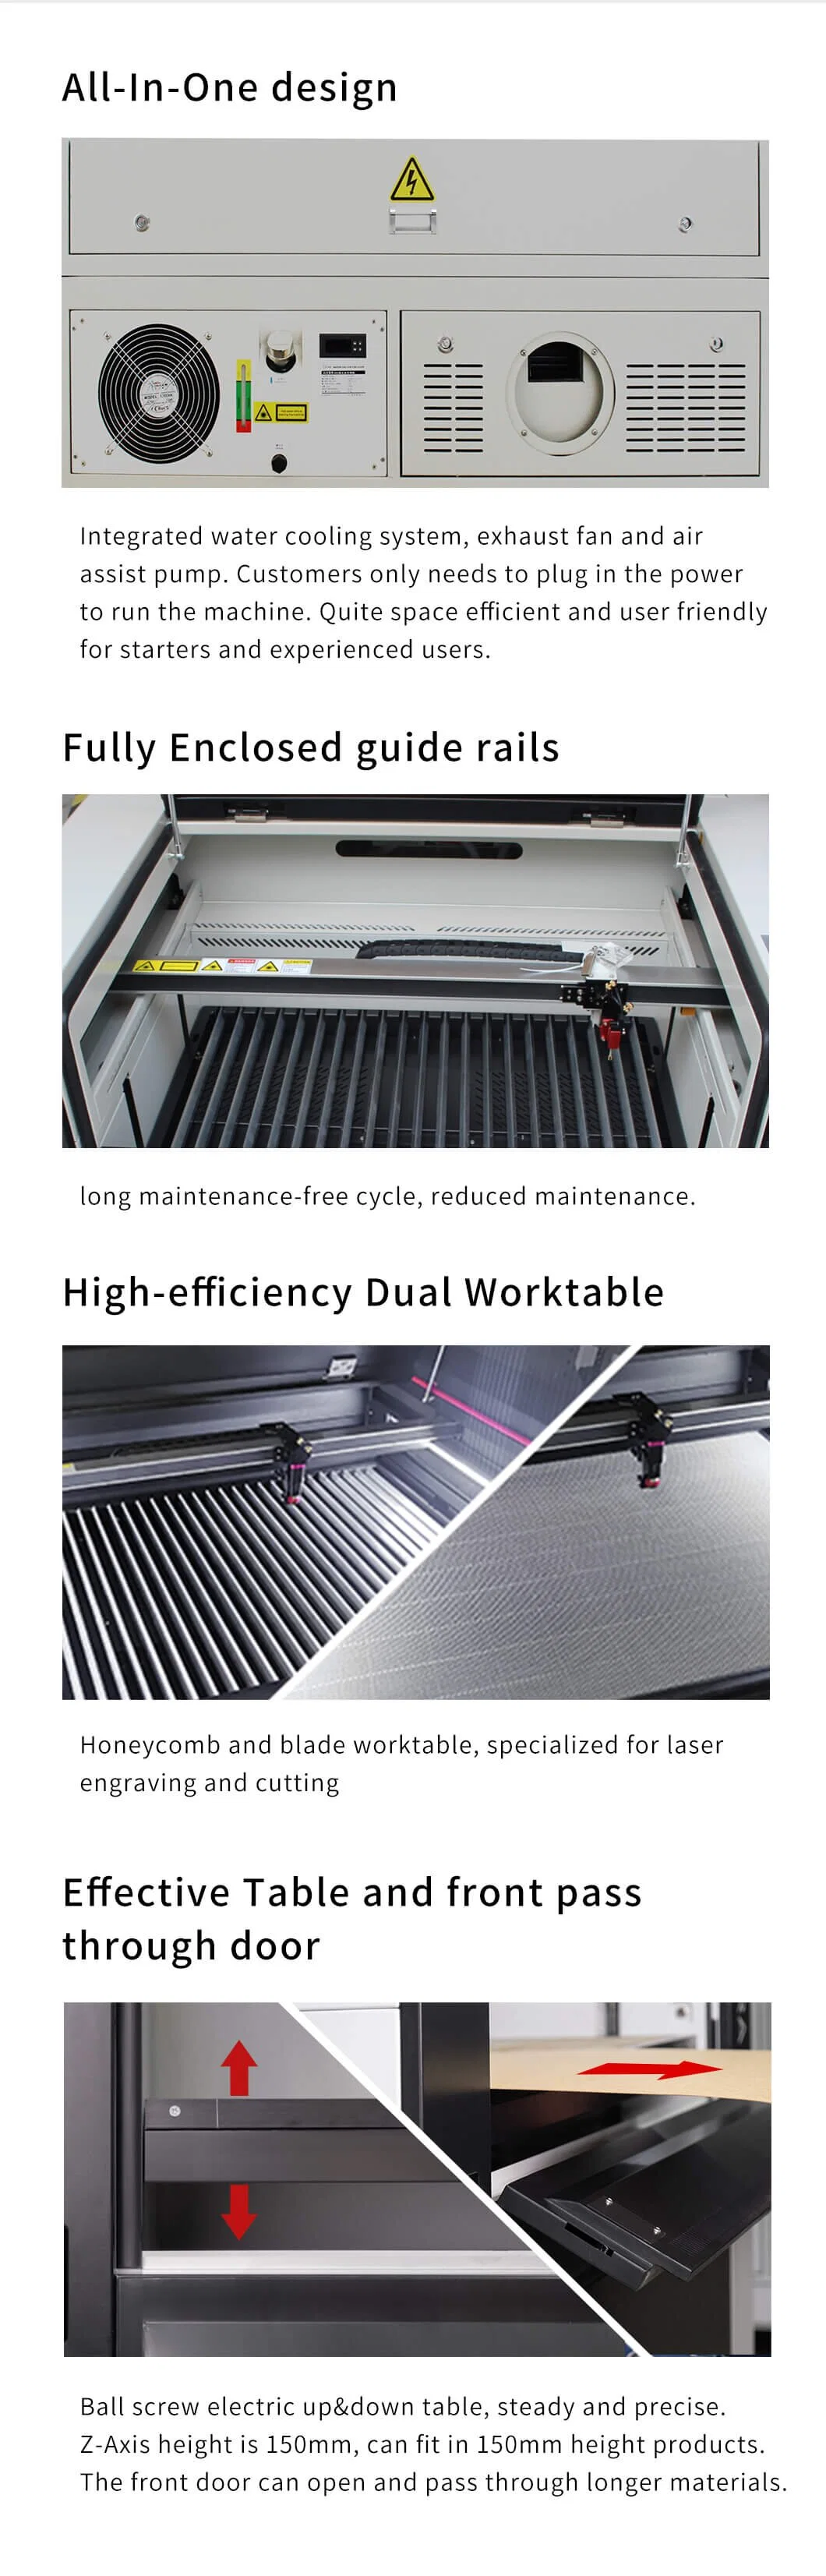 Semi-Automatic Home Business 9060 CO2 Glass Tube Laser Cutter with Ruida Control System and Lightburn Software, Compatible with Windows, Mac Osx, Linux